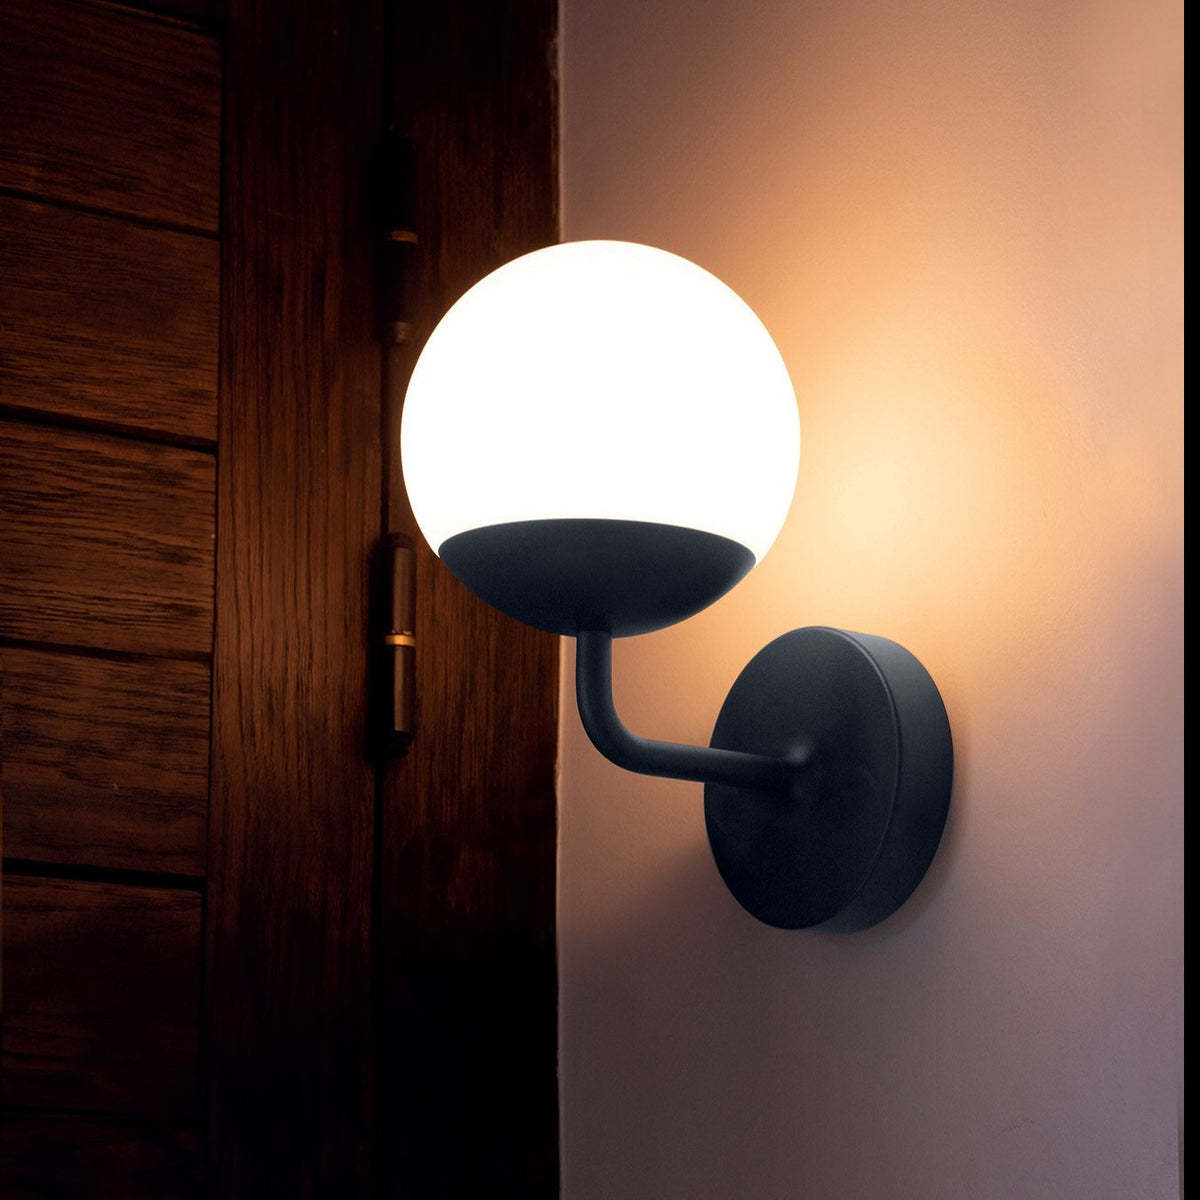 The Fermob Mooon! Wall Lamp in Anthracite.  Design: Tristan Lohner